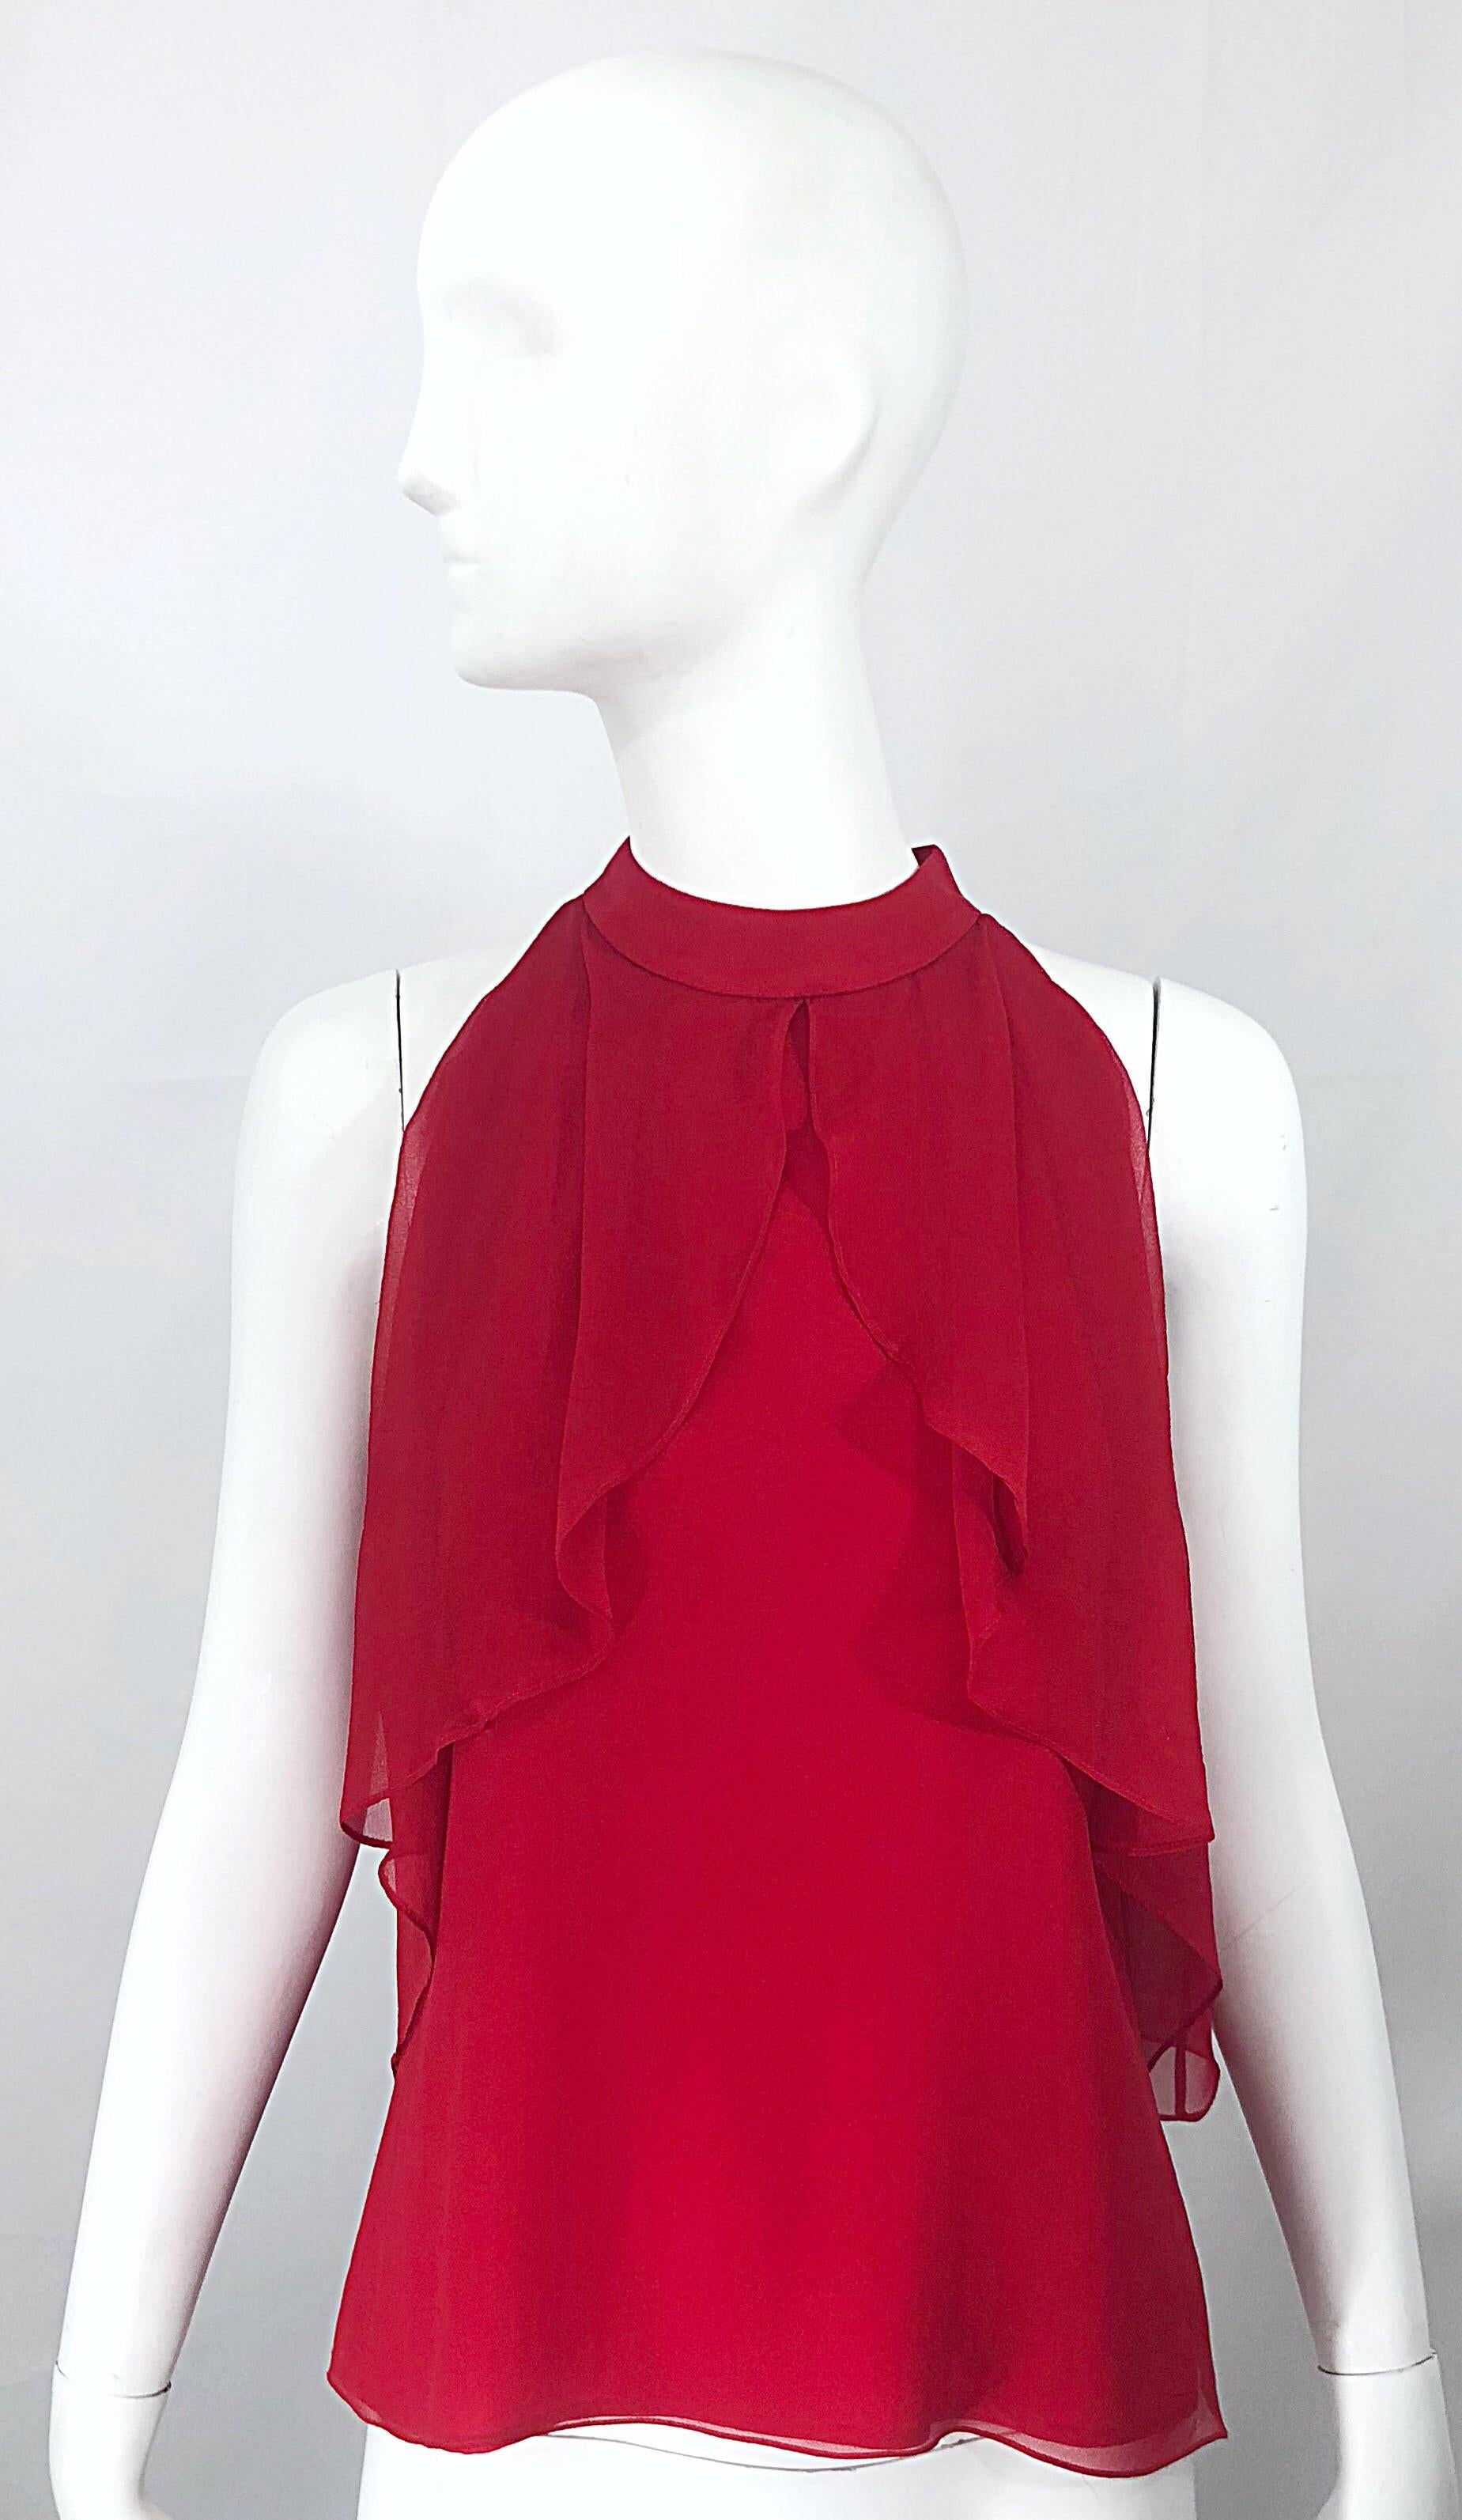 Chic early 2000s CHIRSTOPHER DEAN lipstic red silk chiffon sleeveless blouse! Features flattering and playful ruffles at each side of the bodice. Peek-a-boo in the back reveals just the right amount of skin. Great for the upcoming holidays! Can